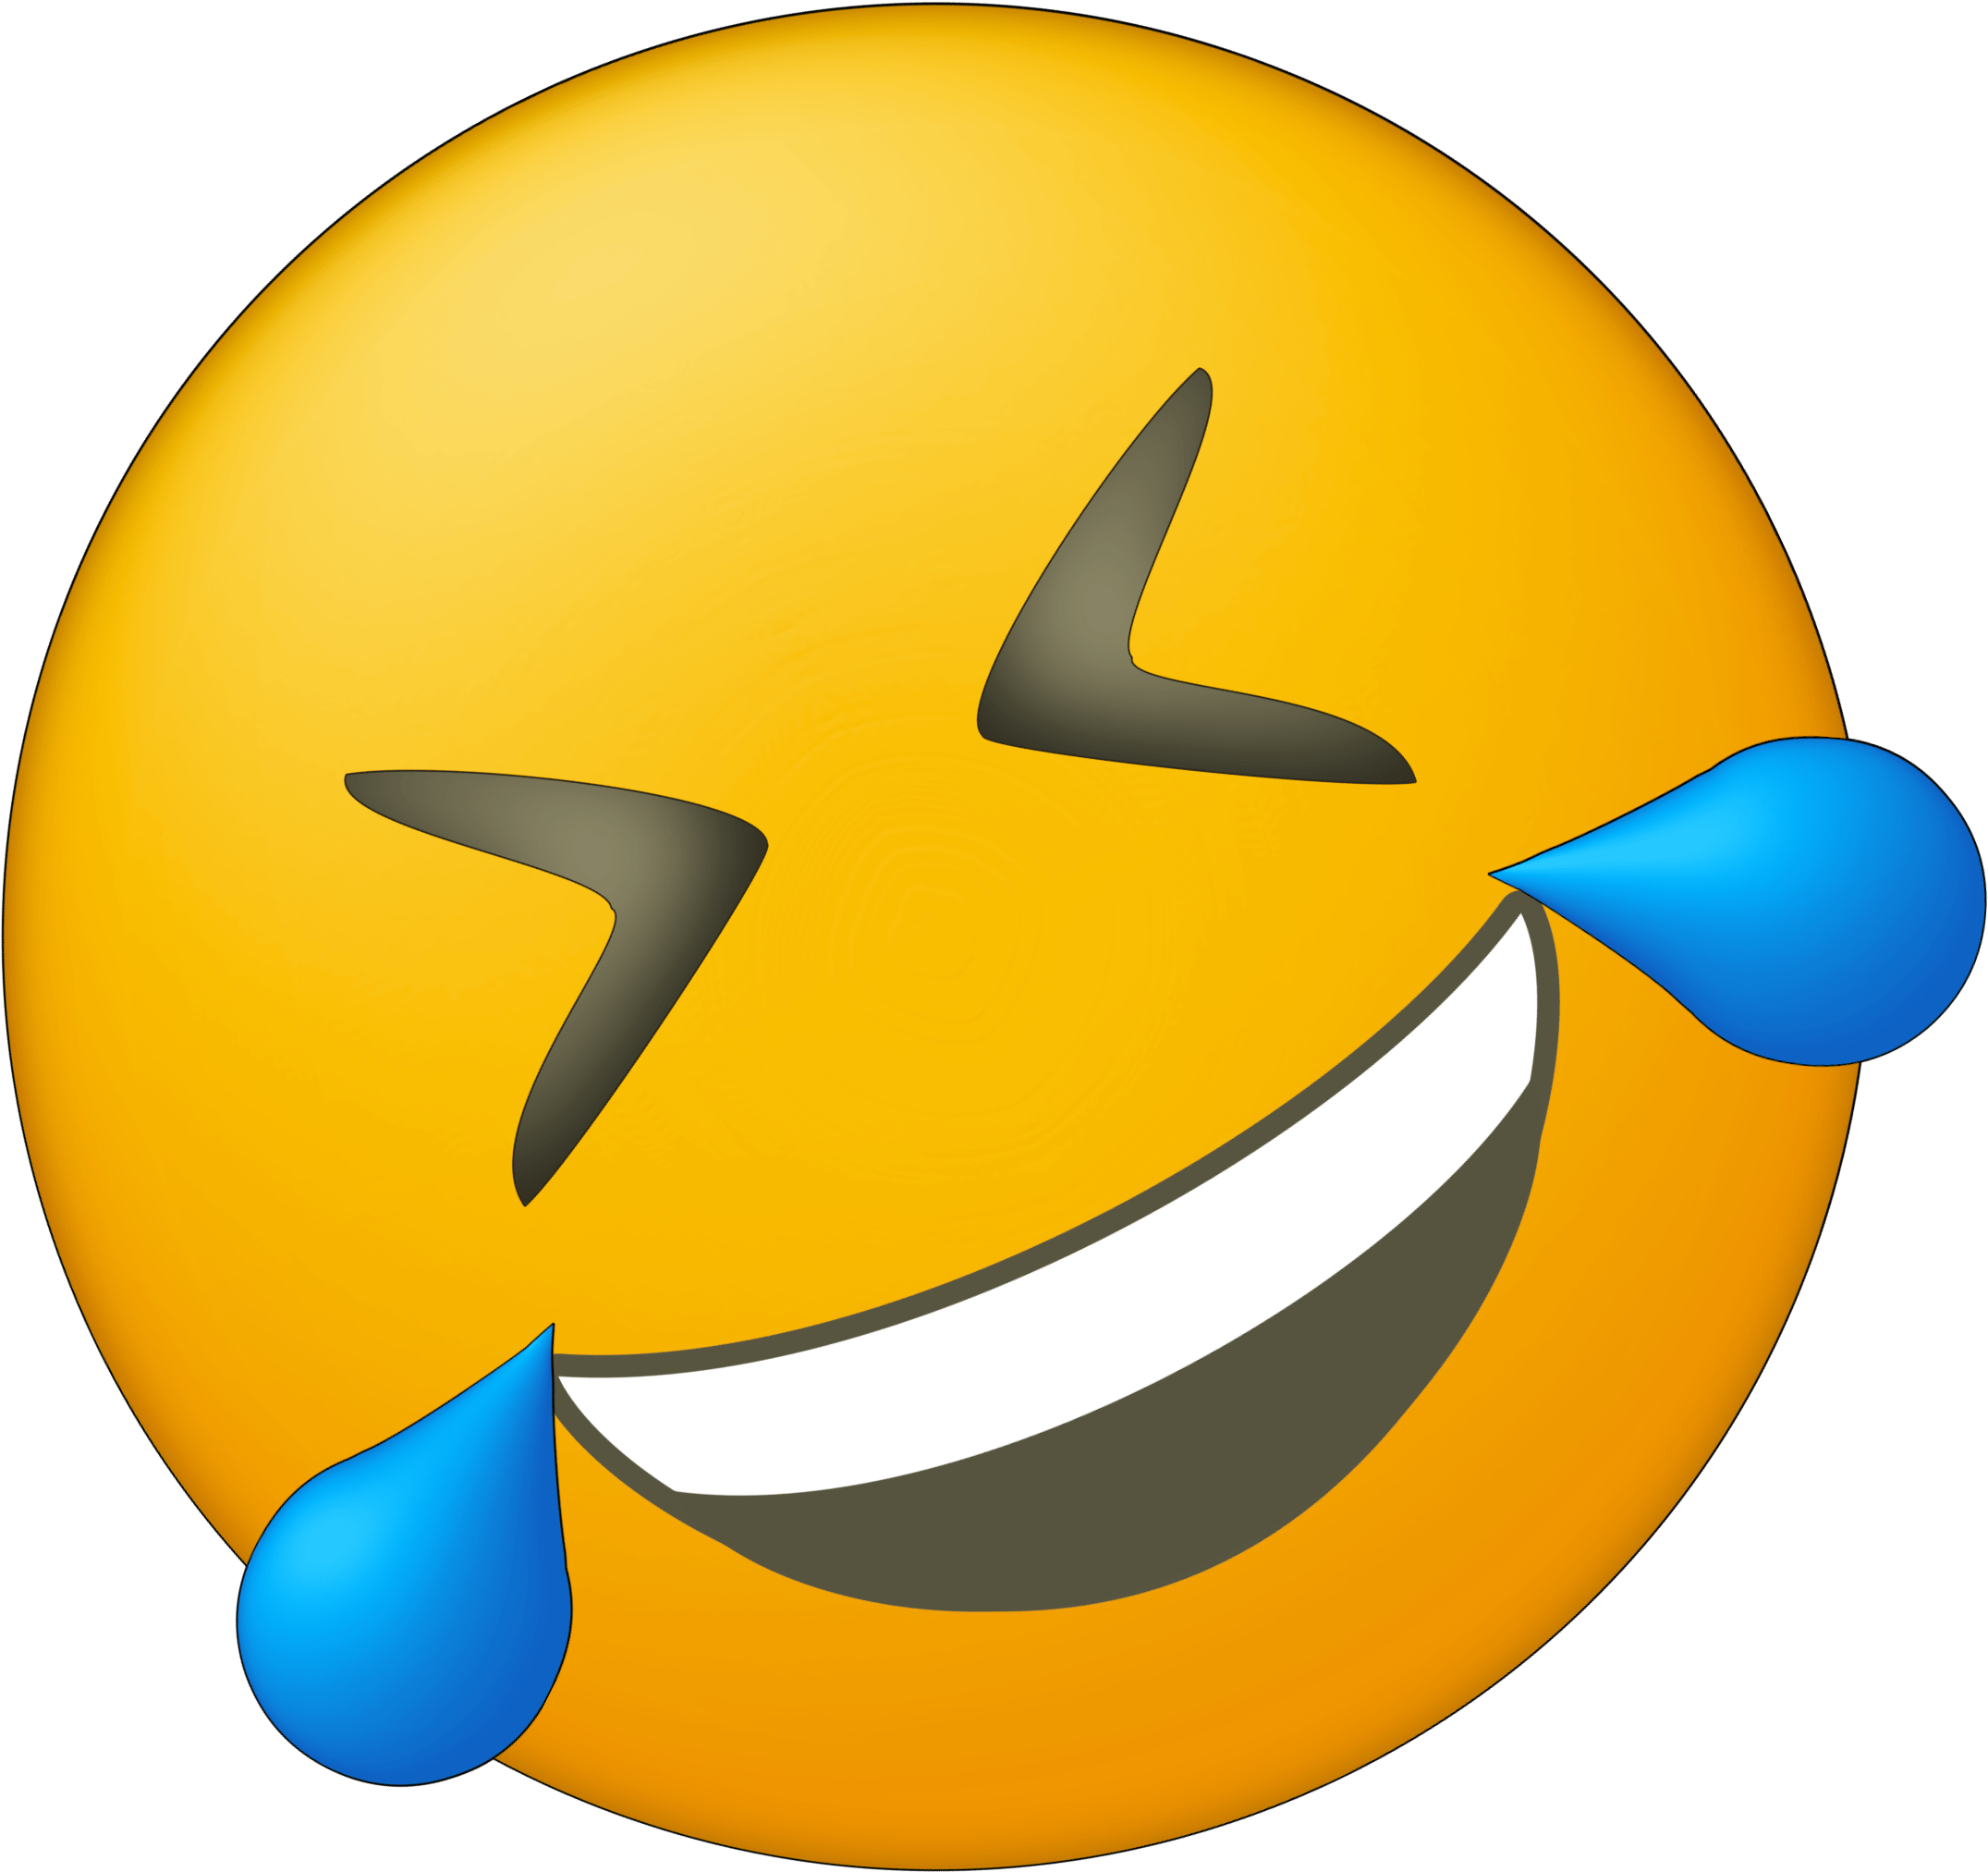 Laugh Crying Emoji PNG Images Transparent Background | PNG Play